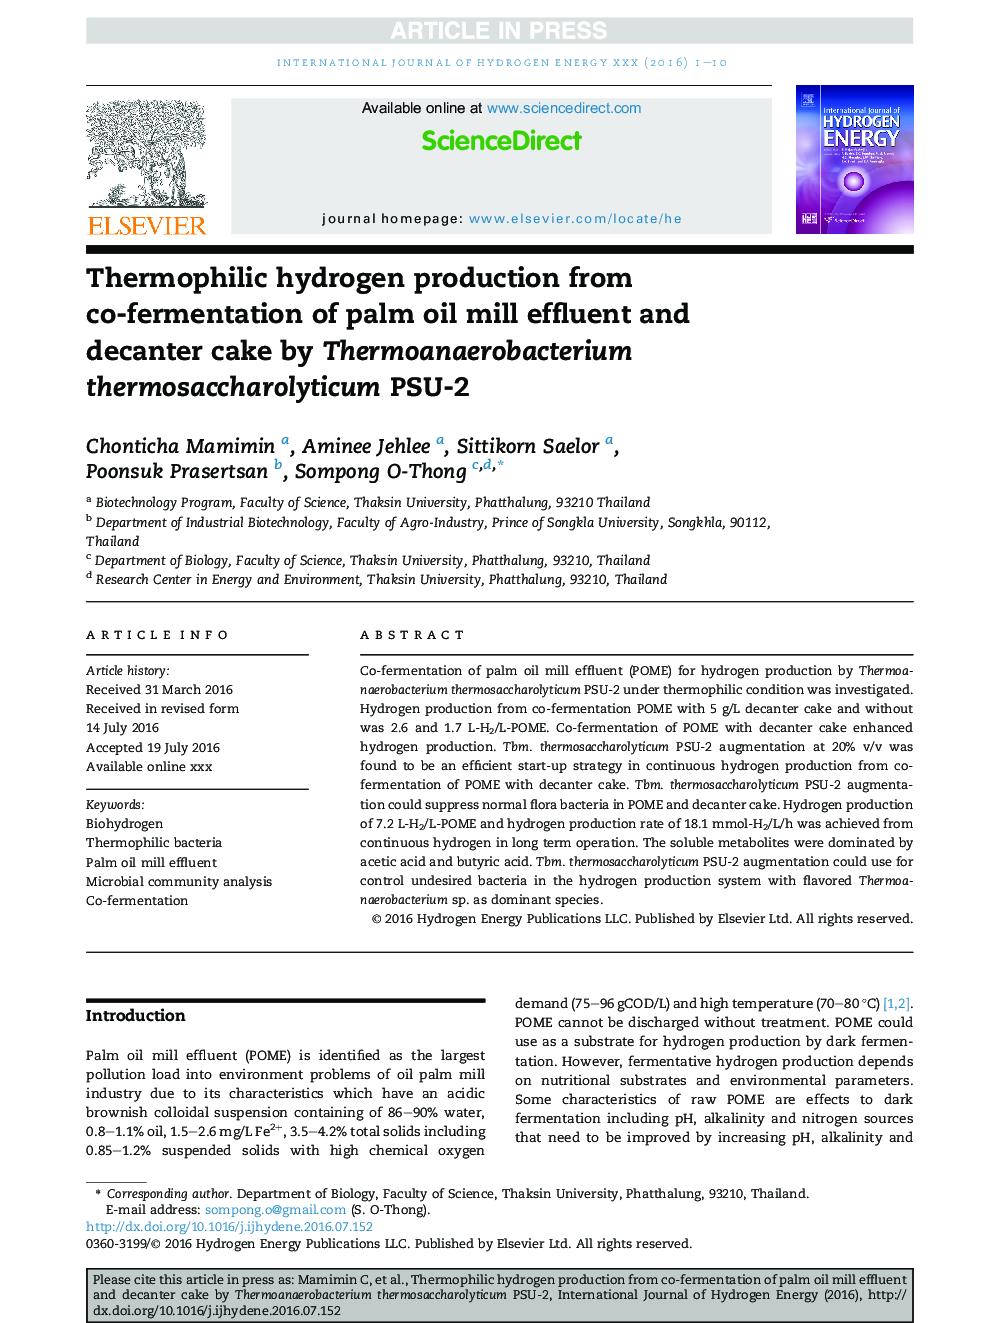 Thermophilic hydrogen production from co-fermentation of palm oil mill effluent and decanter cake by Thermoanaerobacterium thermosaccharolyticum PSU-2